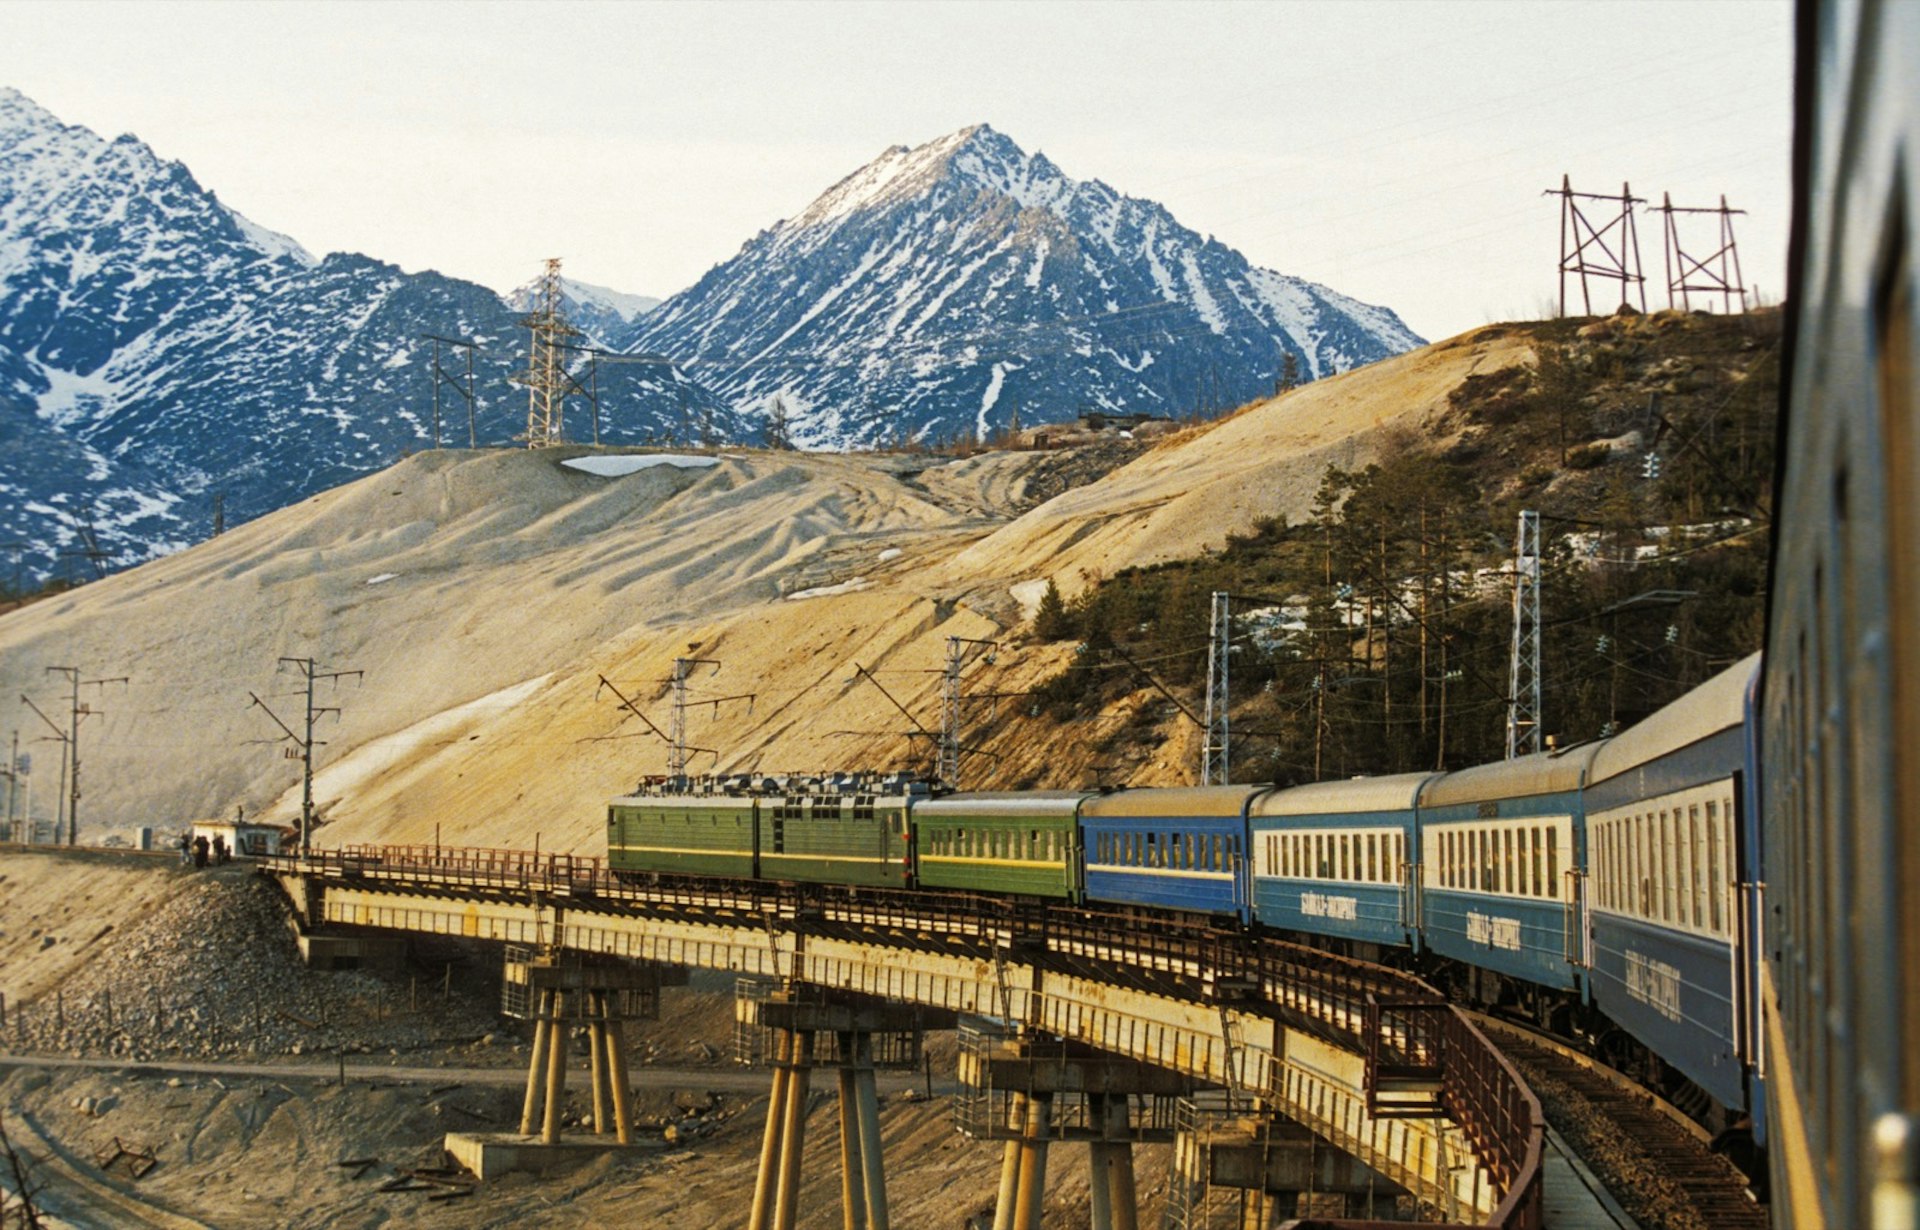 Dusty green and blue train cars rumble over a curved bridge at the base of a snow-capped mountain in Russia; amazing train journeys